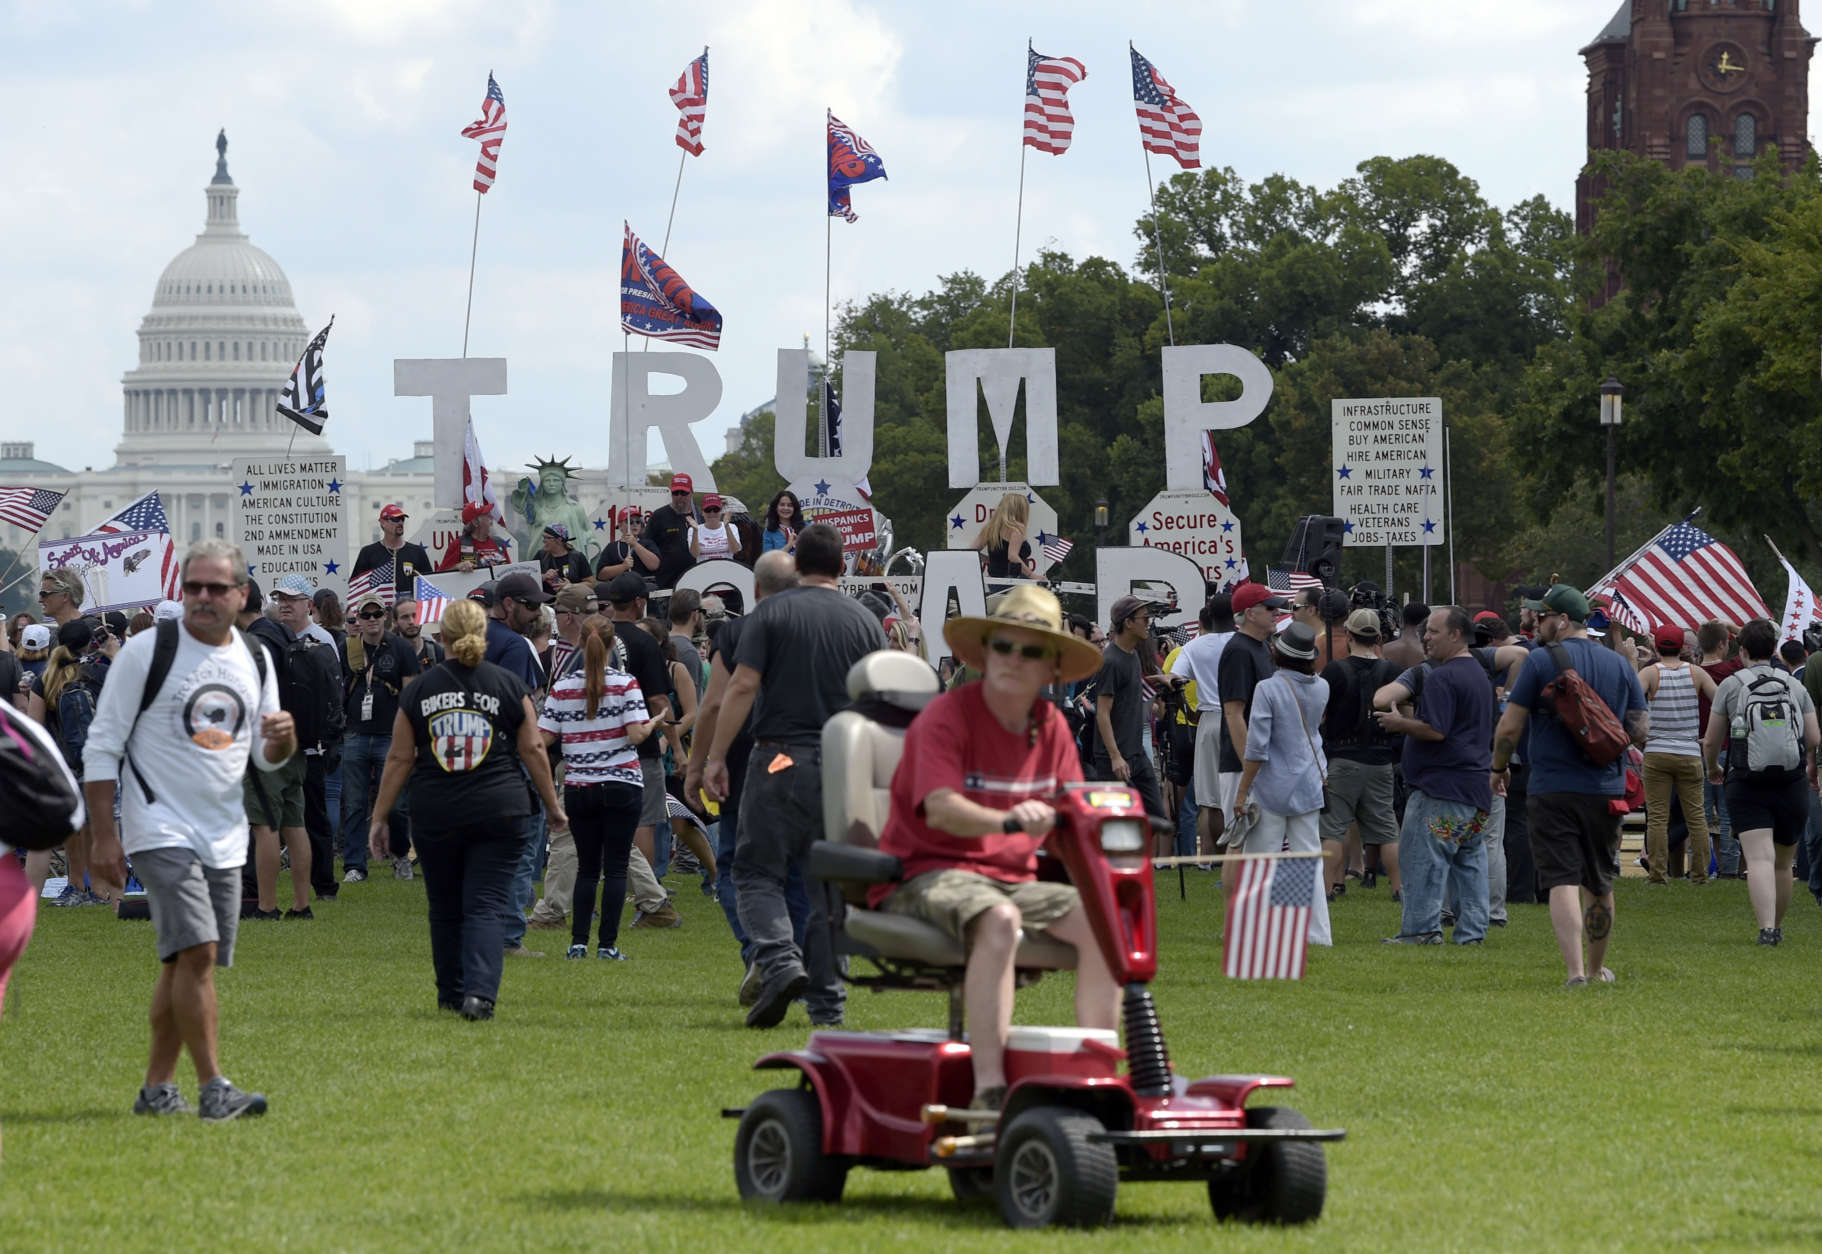 With the U.S. Capitol in the background, people gather on the National Mall in Washington, Saturday, Sept. 16, 2017, to attend a rally in support of President Donald Trump in what organizers are calling 'The Mother of All Rallies." (AP Photo/Susan Walsh)